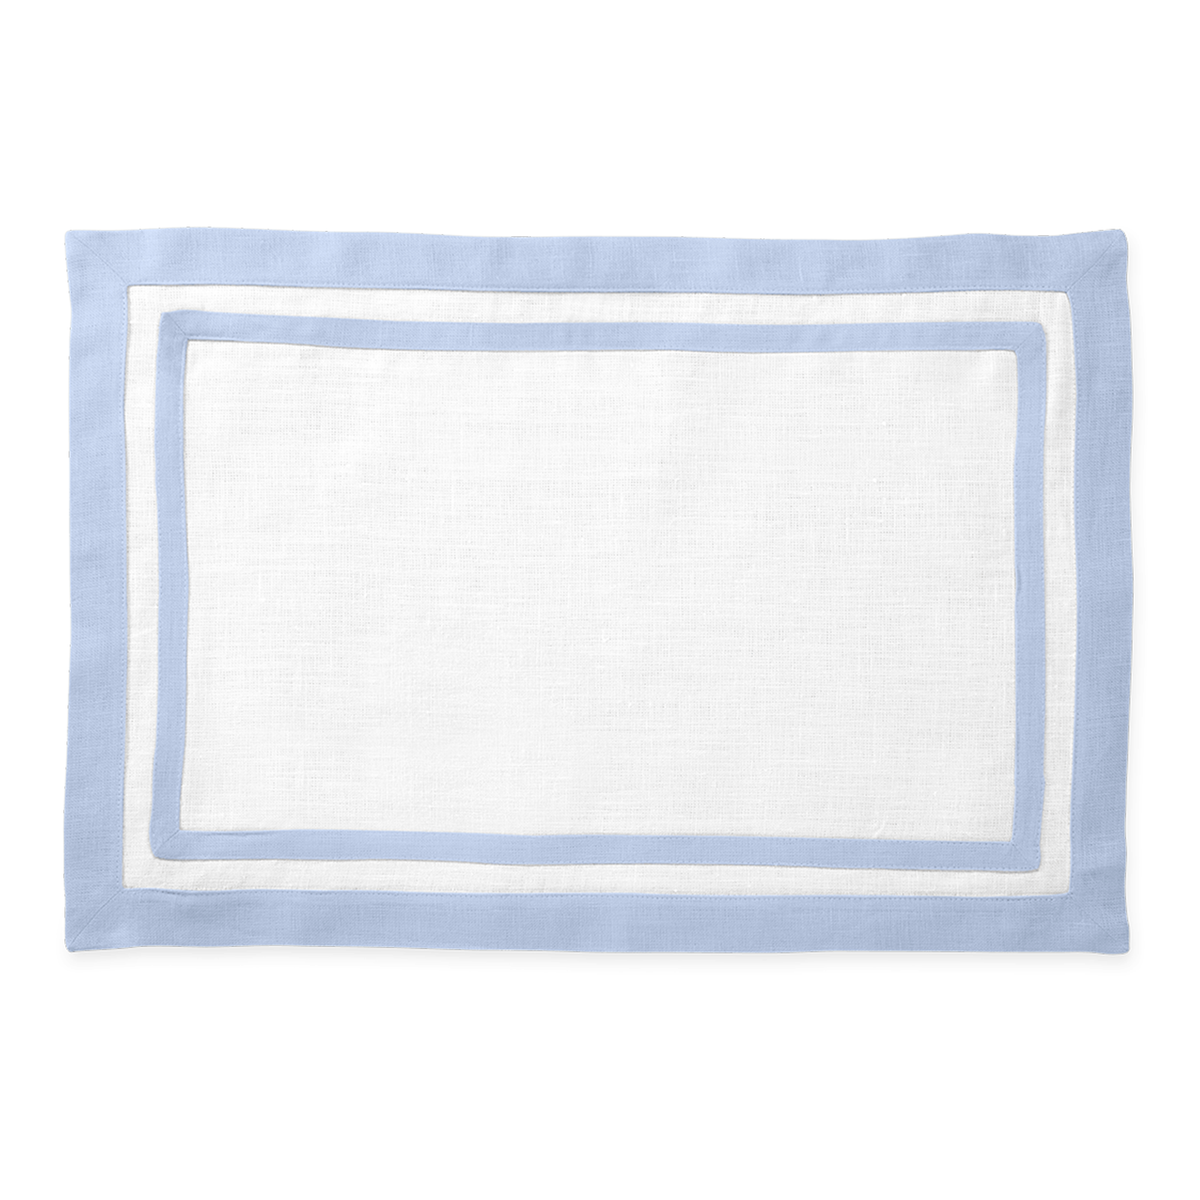 Silo Image of Matouk Double Border Rectangle Placemat in Color Ice Blue